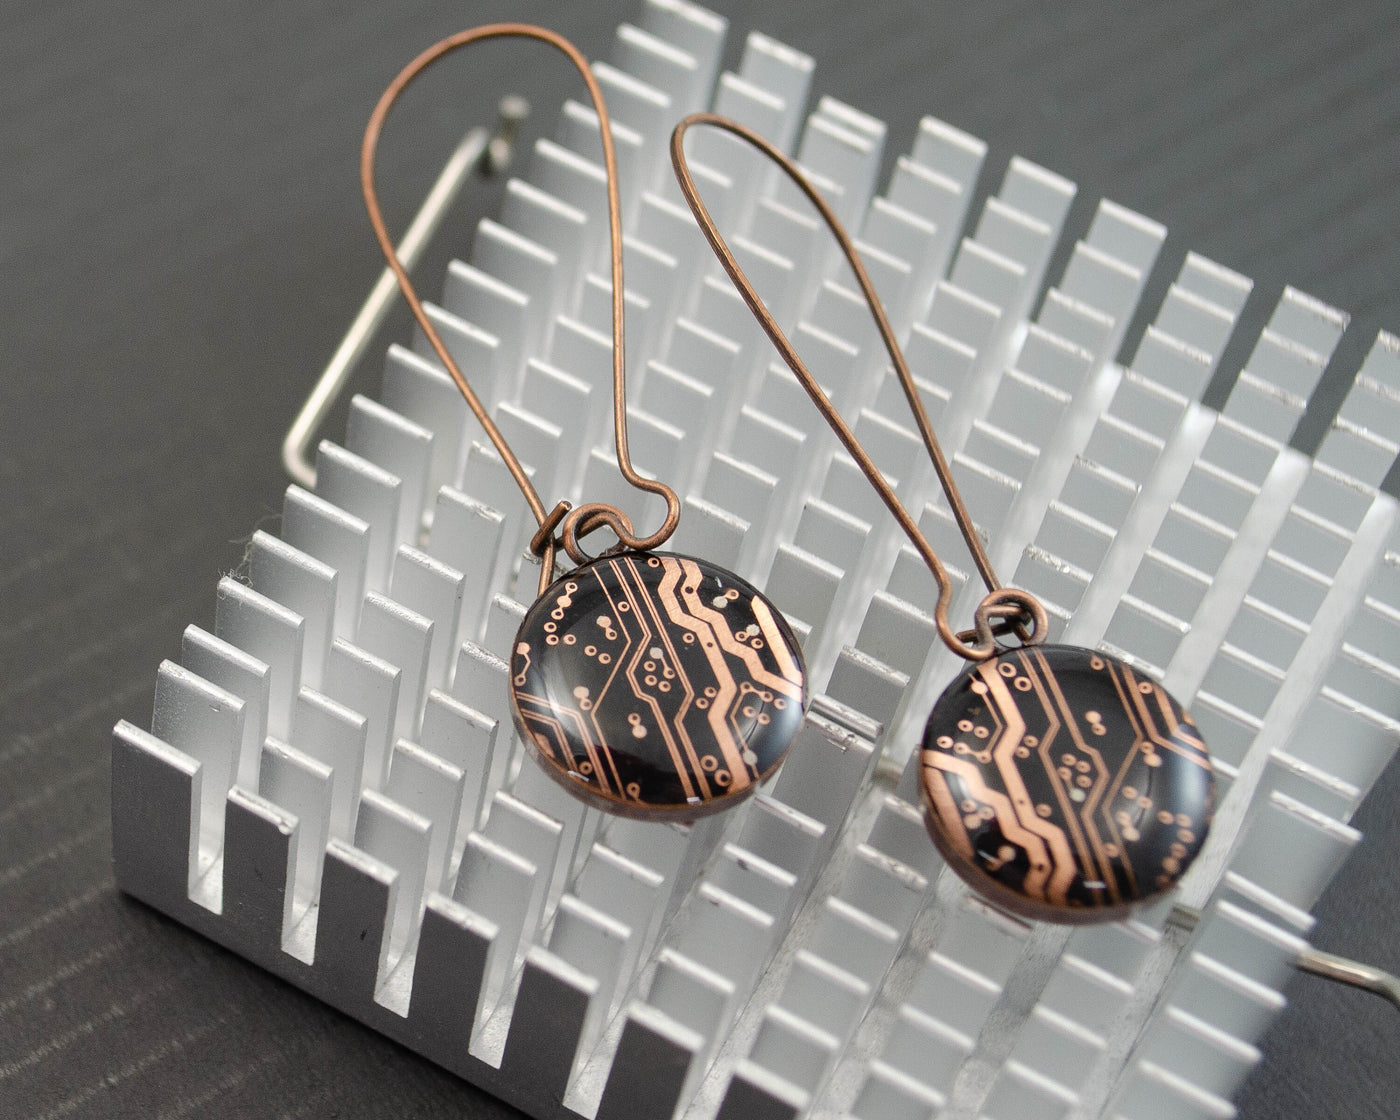 Copper Recycled Circuit Board Earrings, Dangle Earrings Nerdy Engineer Jewelry Gifts for Scientists Science Gift Wearable Technology